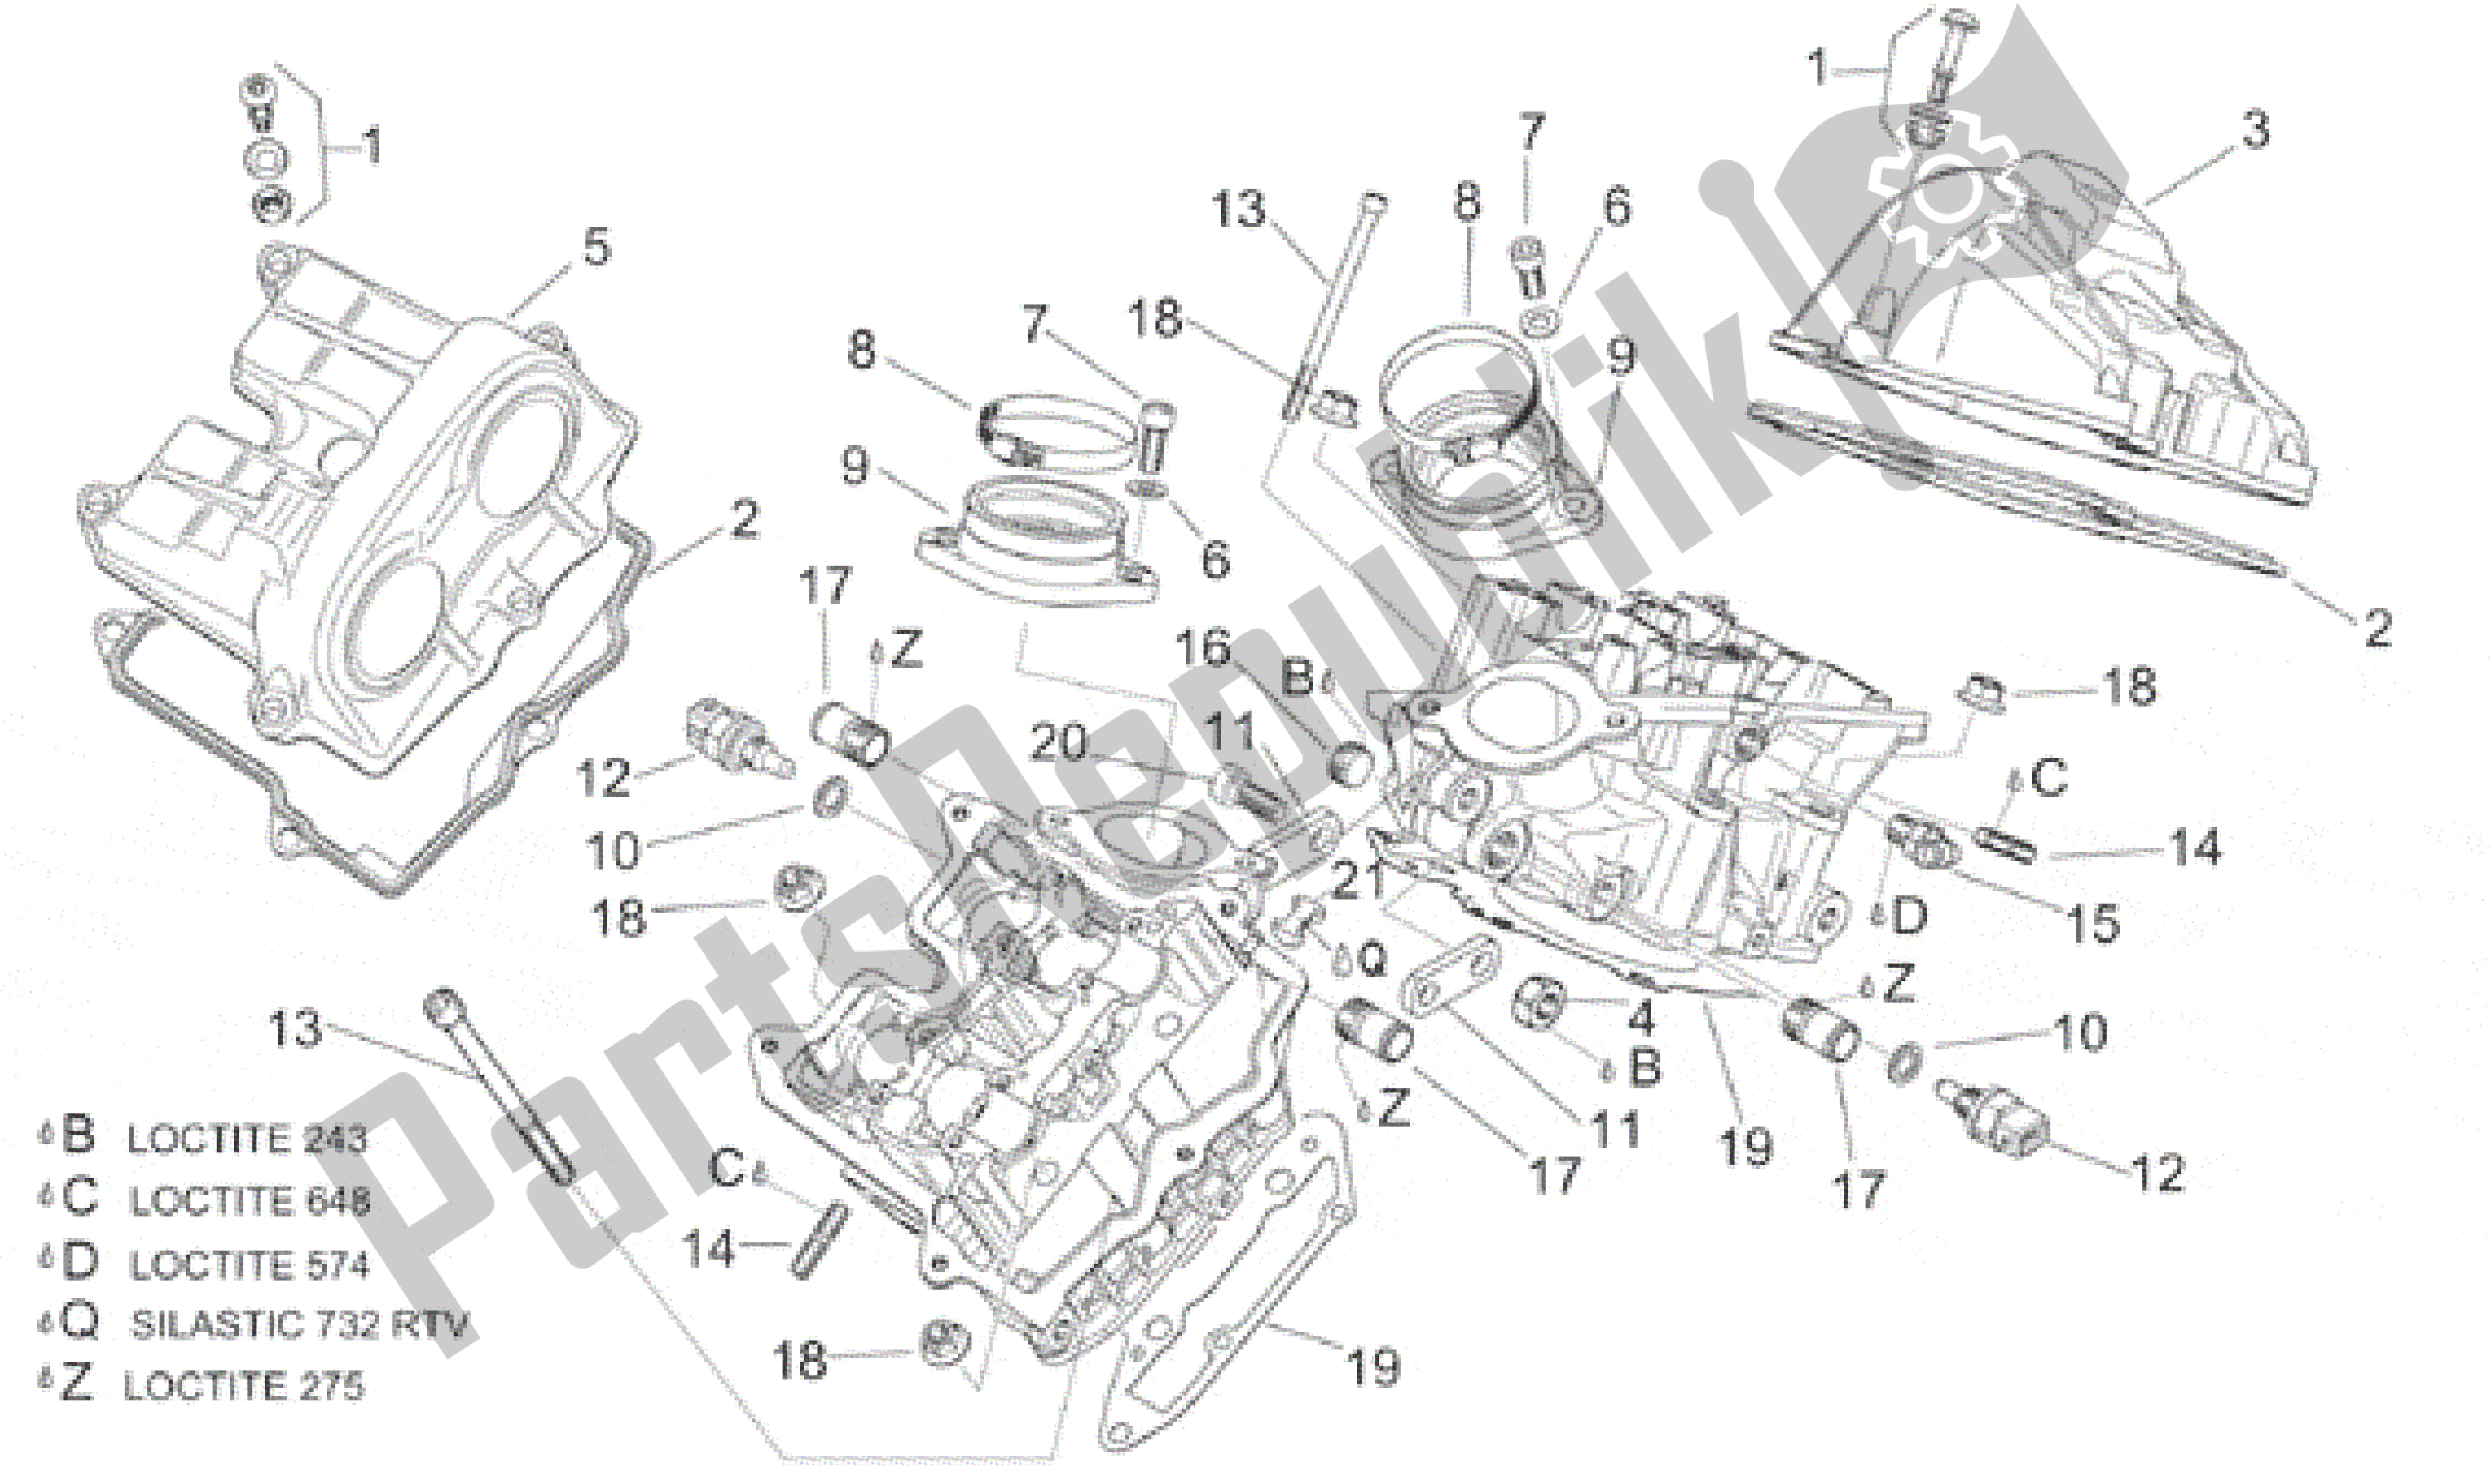 All parts for the Valves Cover of the Aprilia RST 1000 2001